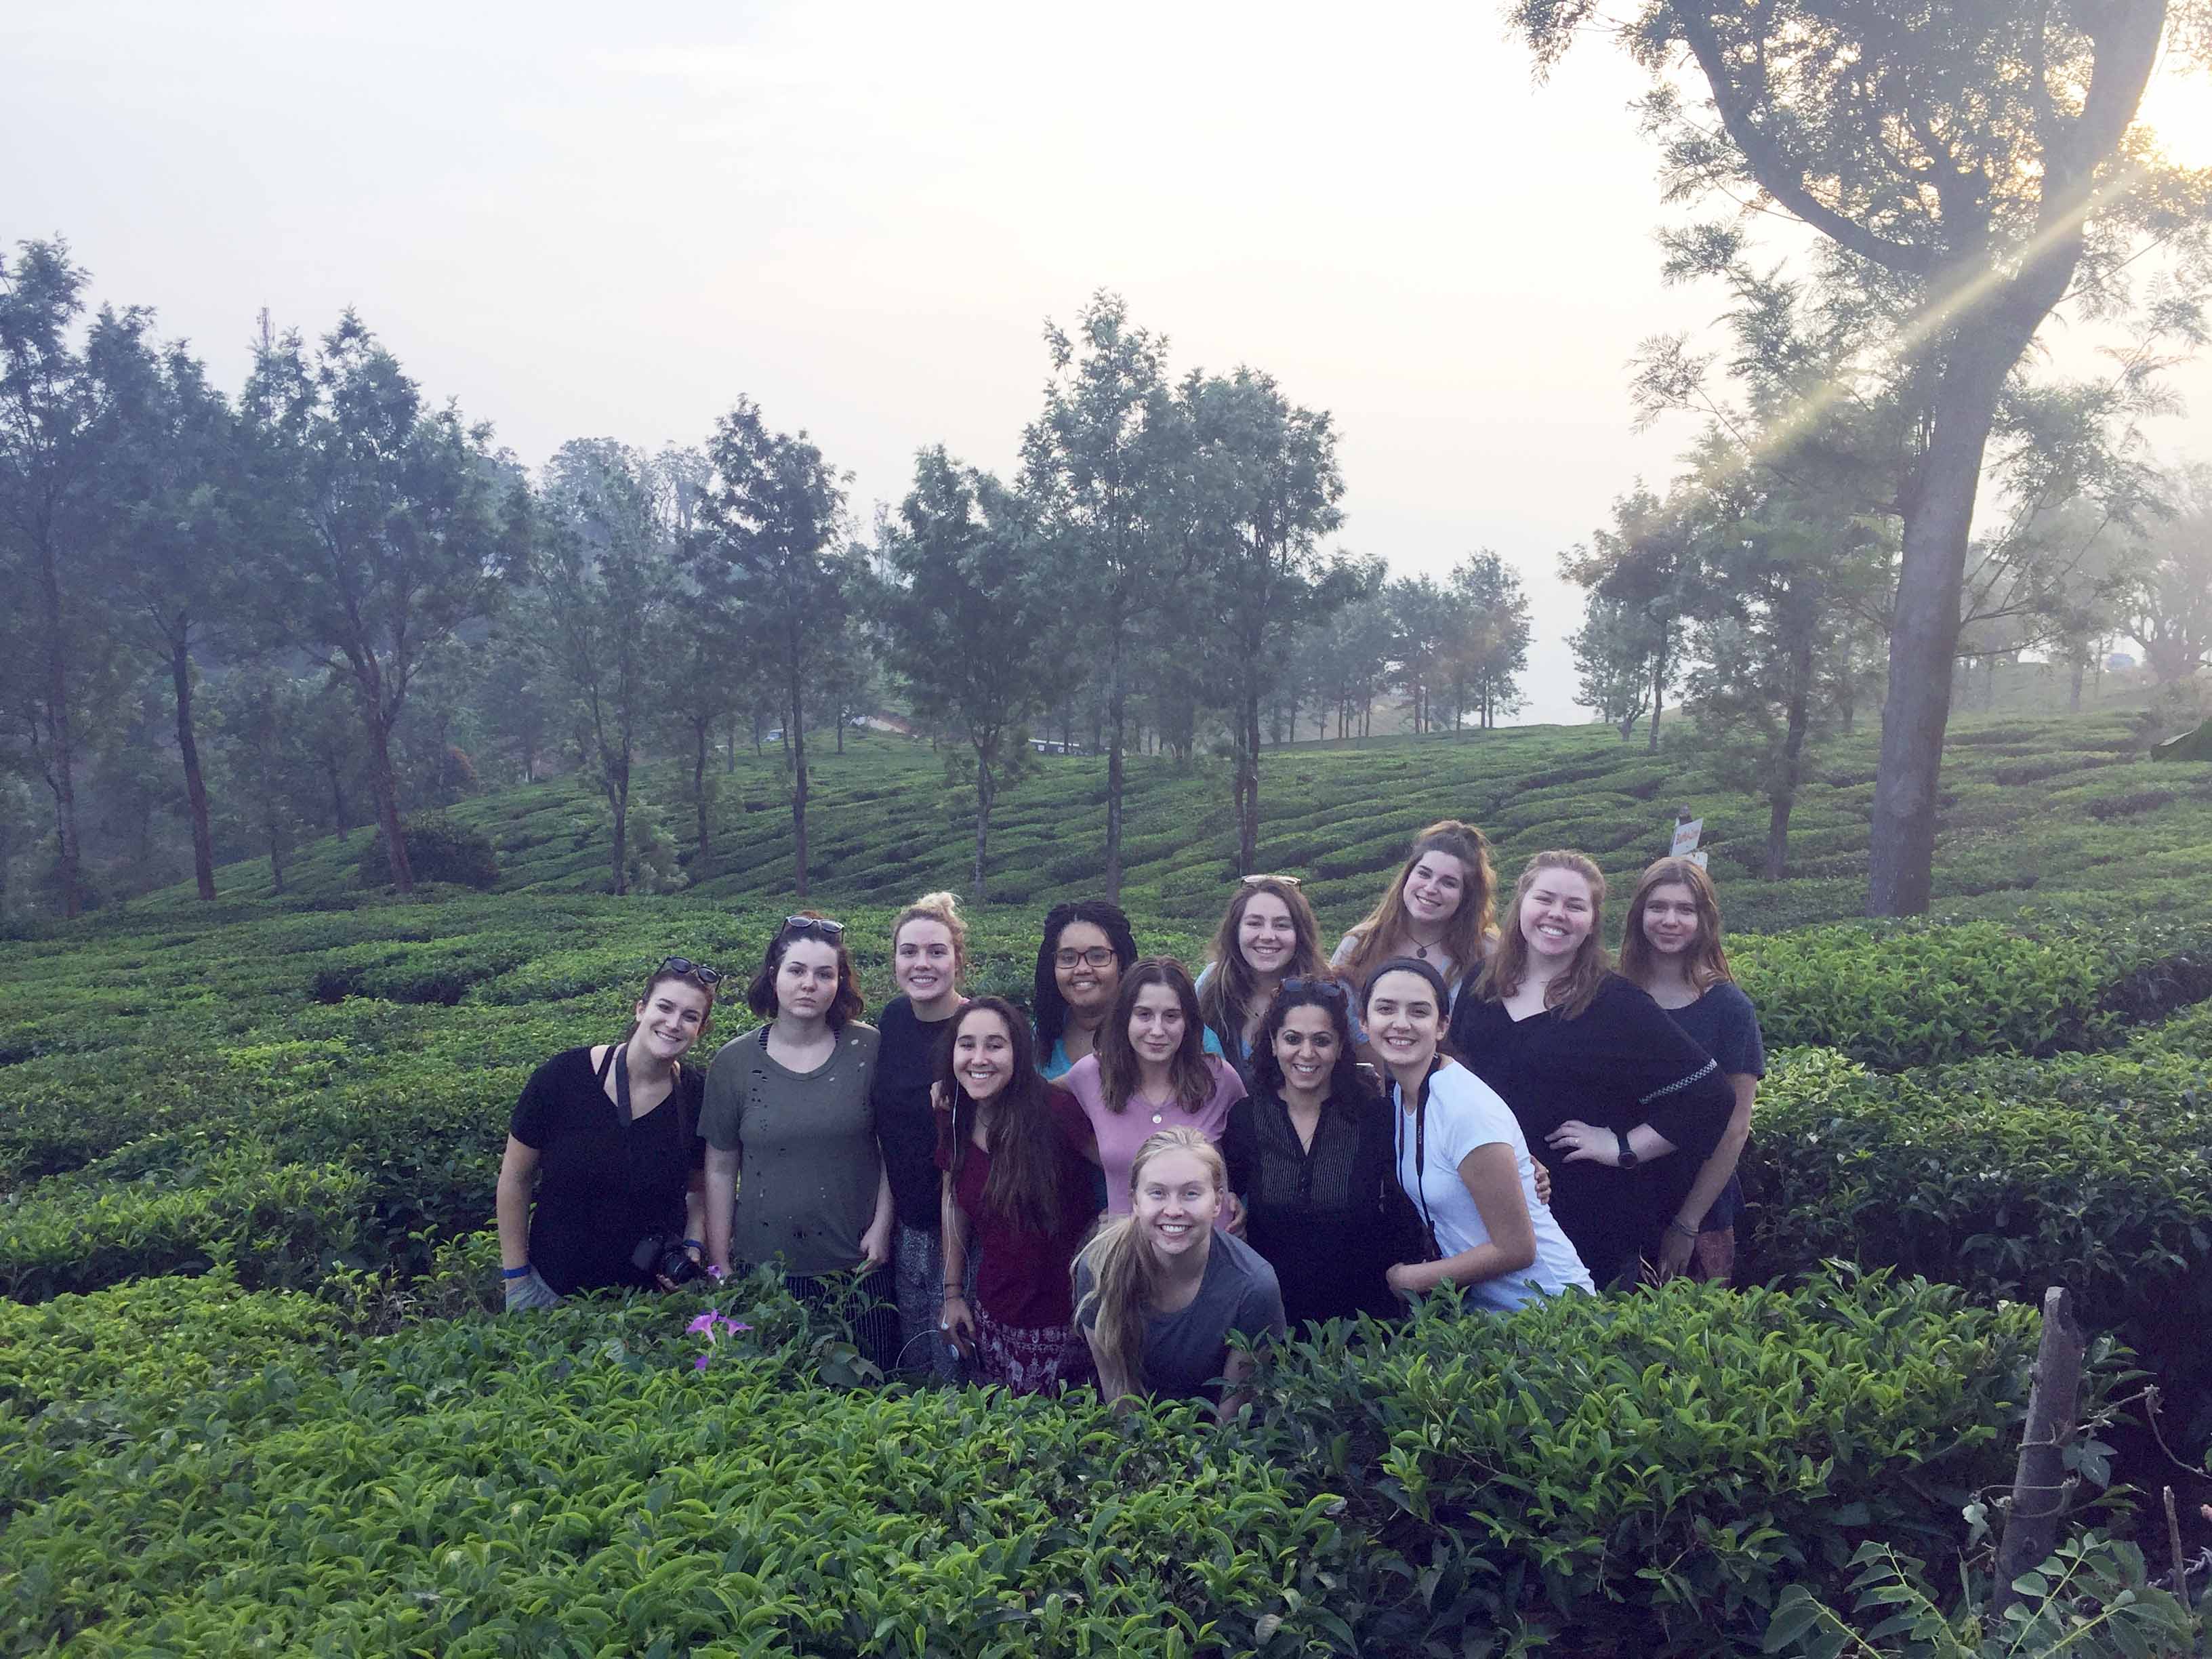 A group of people standing in the tea garden fields in Munnar, India.